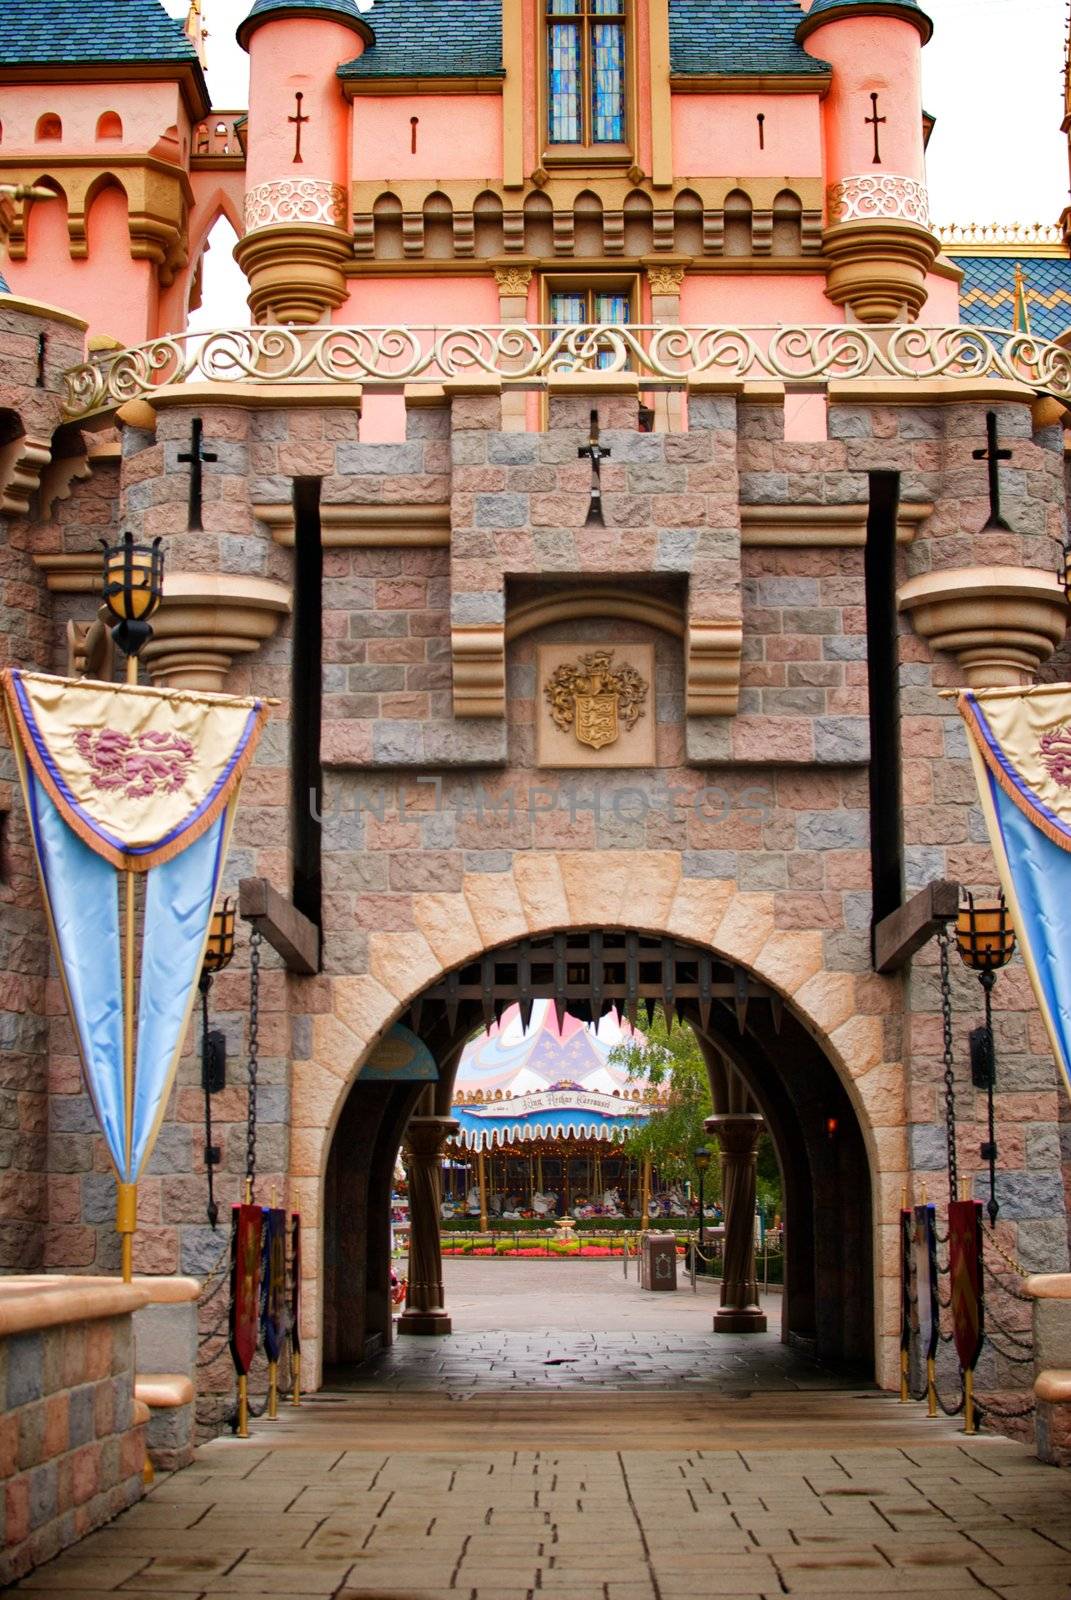 Looking through a fantasy castle's draw bridge entrance to see a carousel in the distance